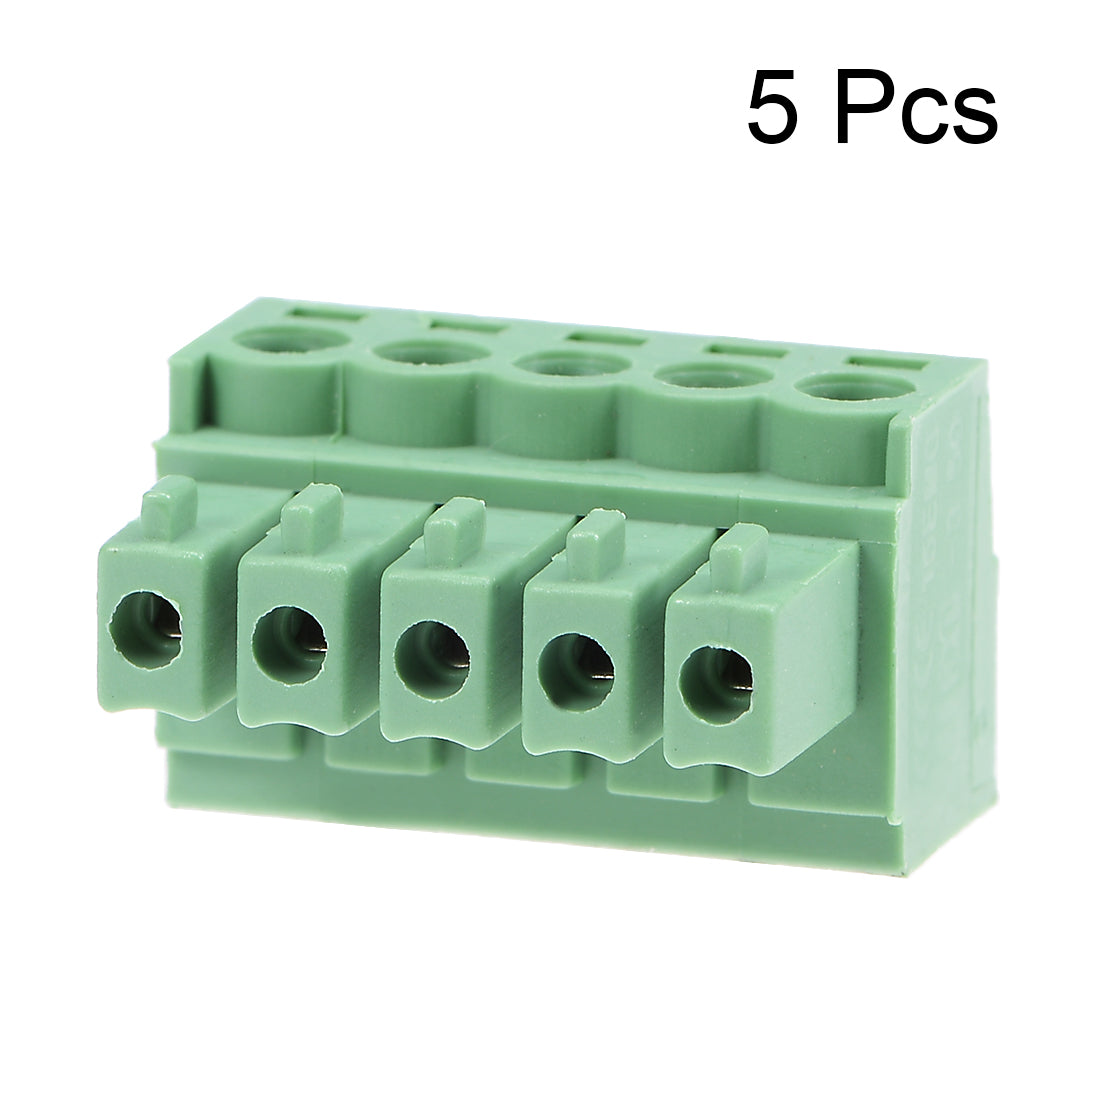 uxcell Uxcell 5Pcs AC300V 8A 3.5mm Pitch 5P Flat Angle Needle Seat Insert-In PCB Terminal Block Connector green